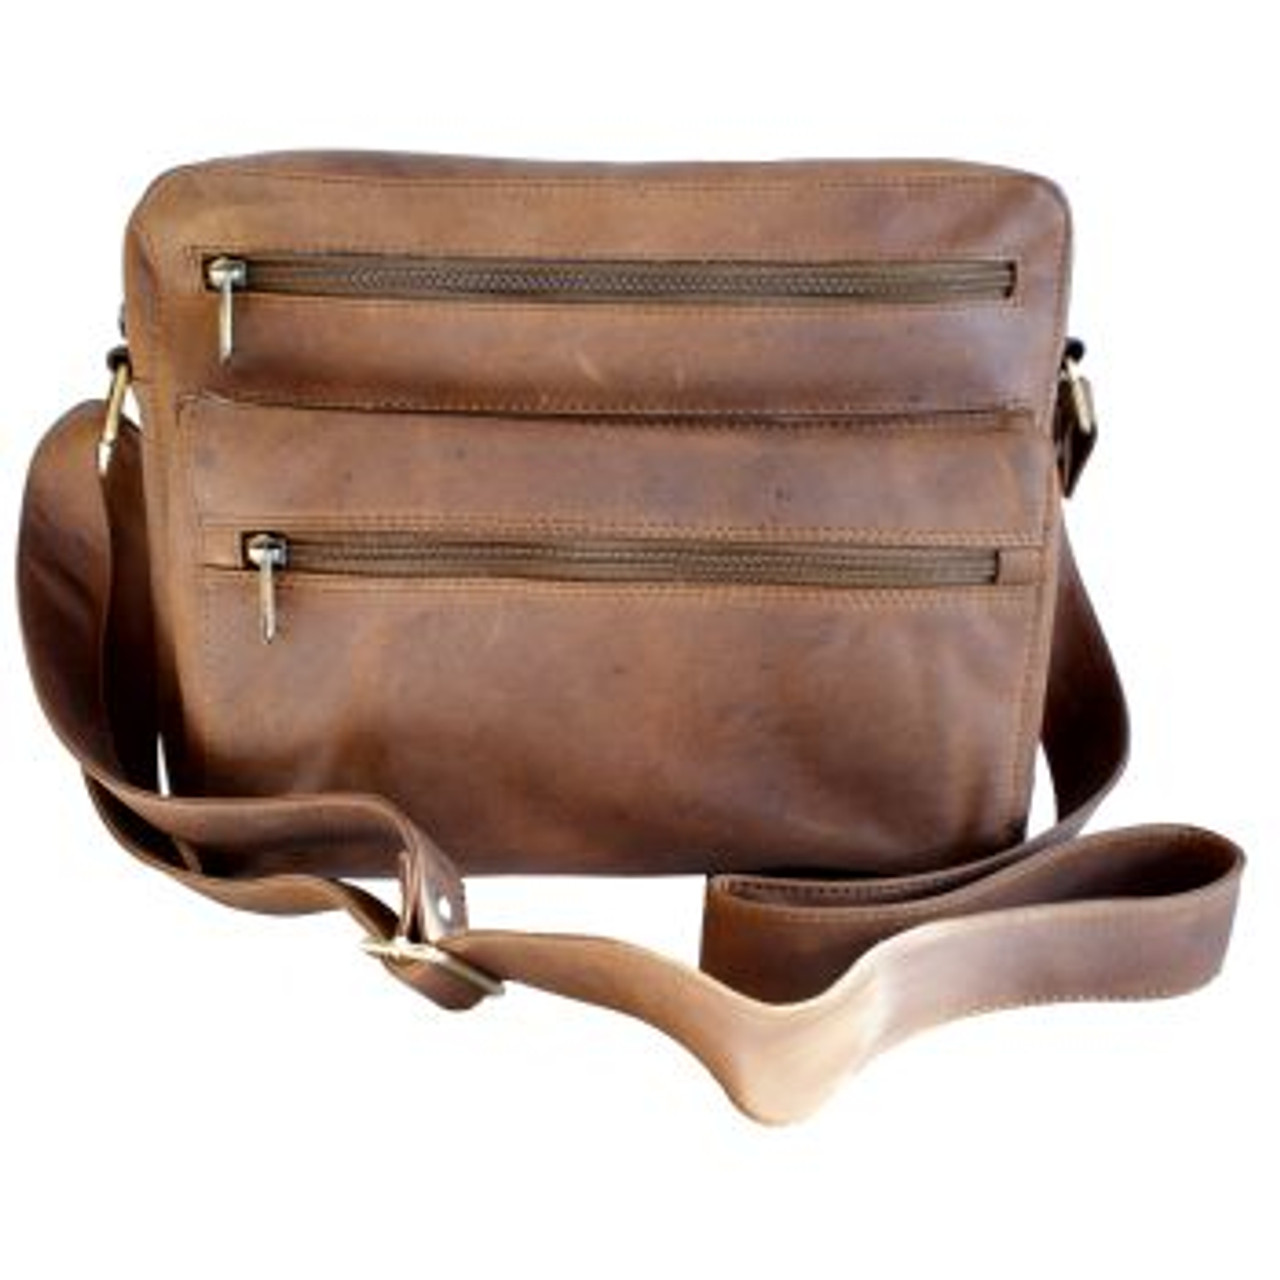 Adrian Klis Leather Messenger Bag with Extra Zippers - Herbert's Boots ...